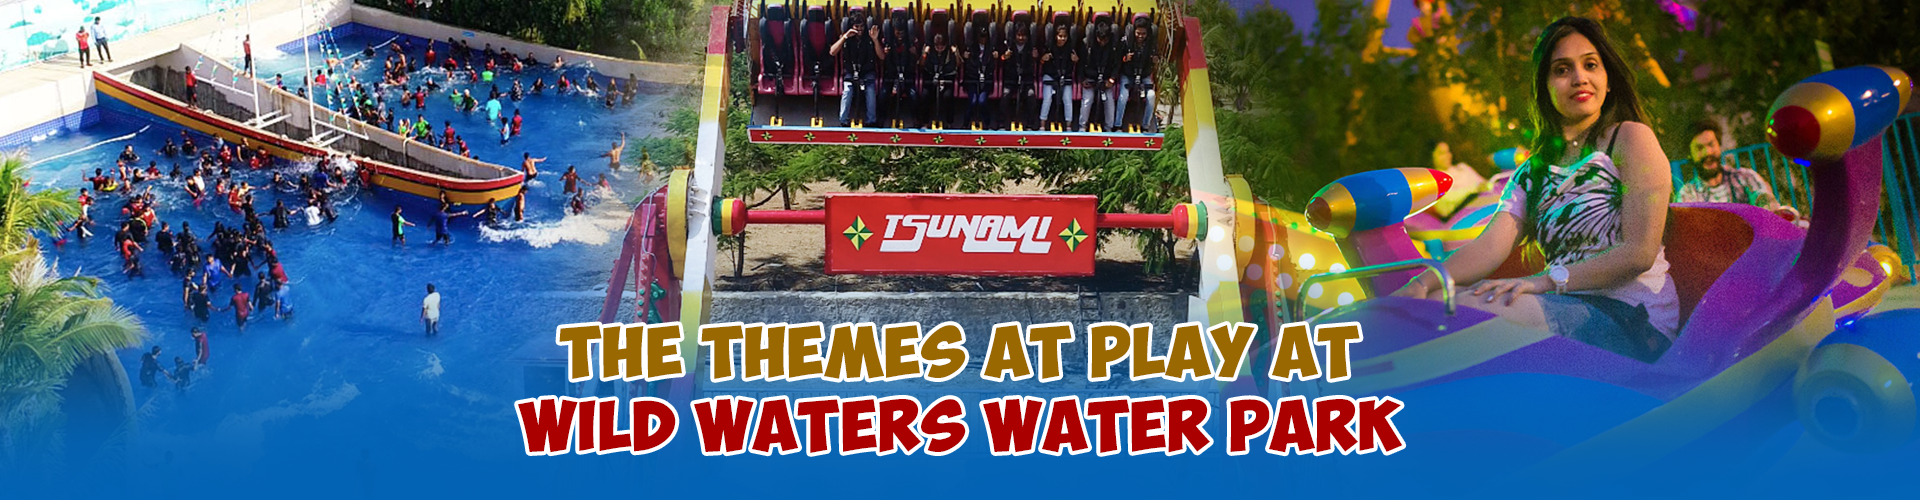 the-themes-at-play-at-wild-waters-water-park-banner